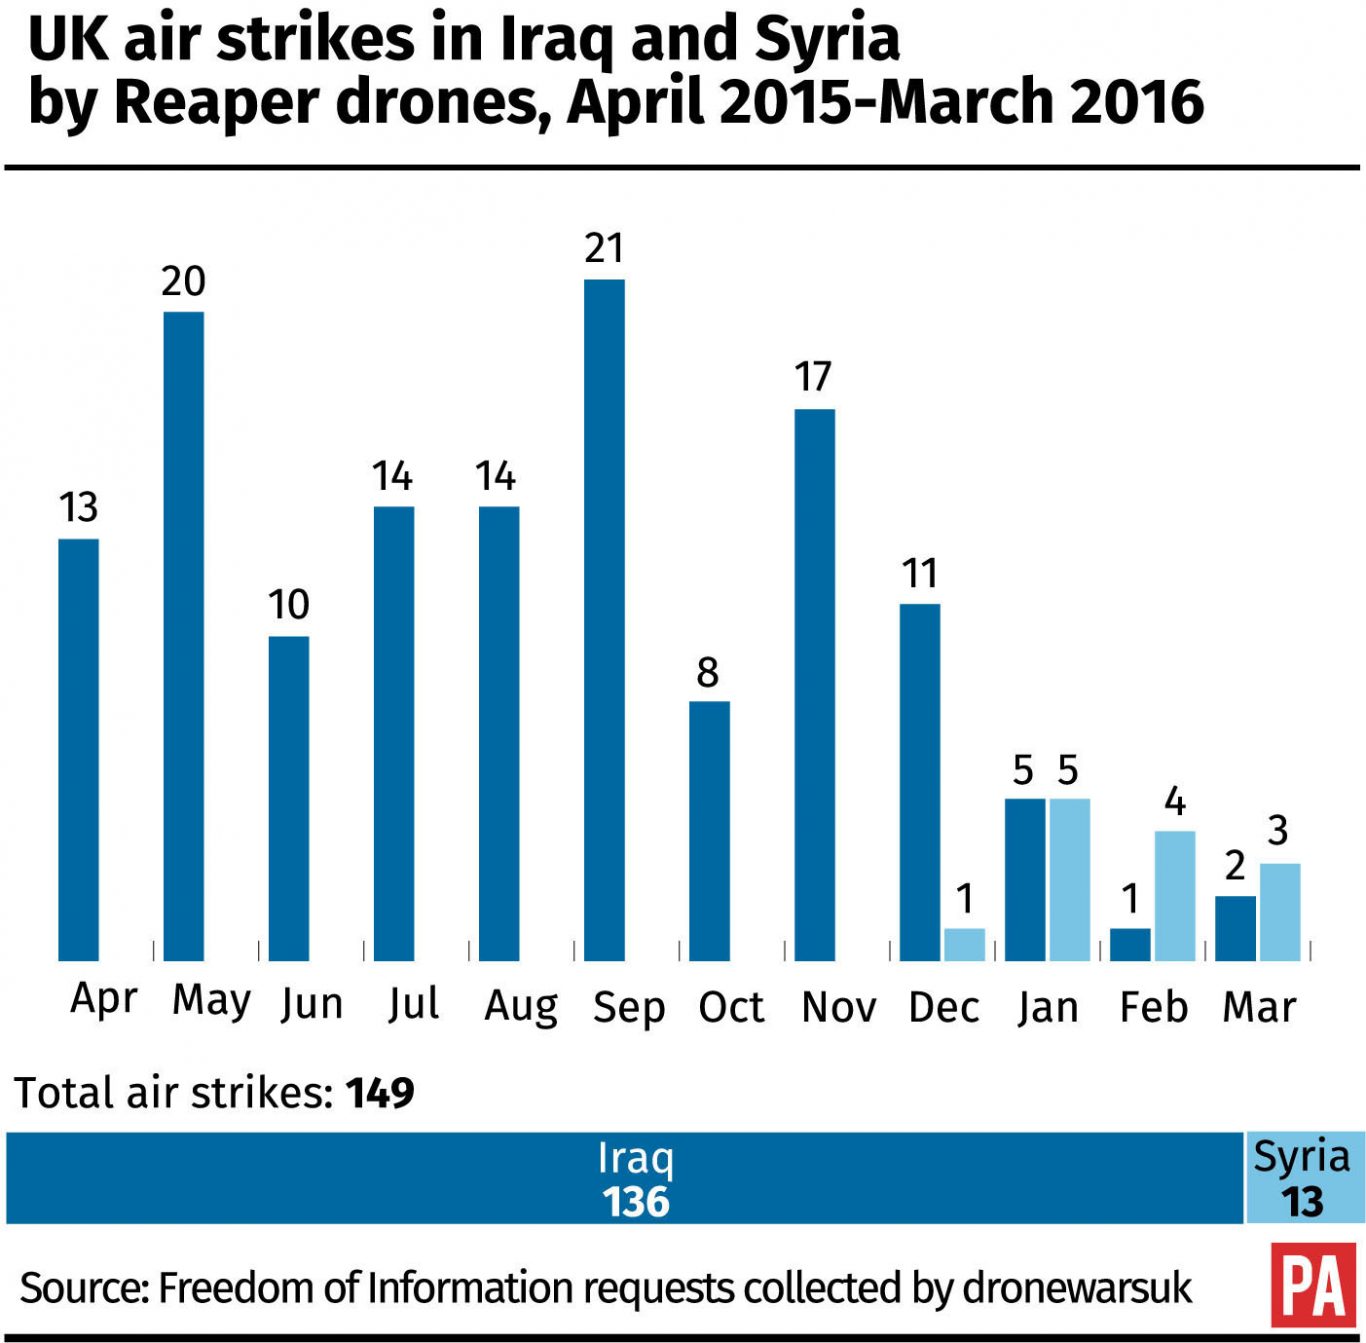 UK airstrikes in Iraq and Syria by Reaper drones, April 2015 - March 2016